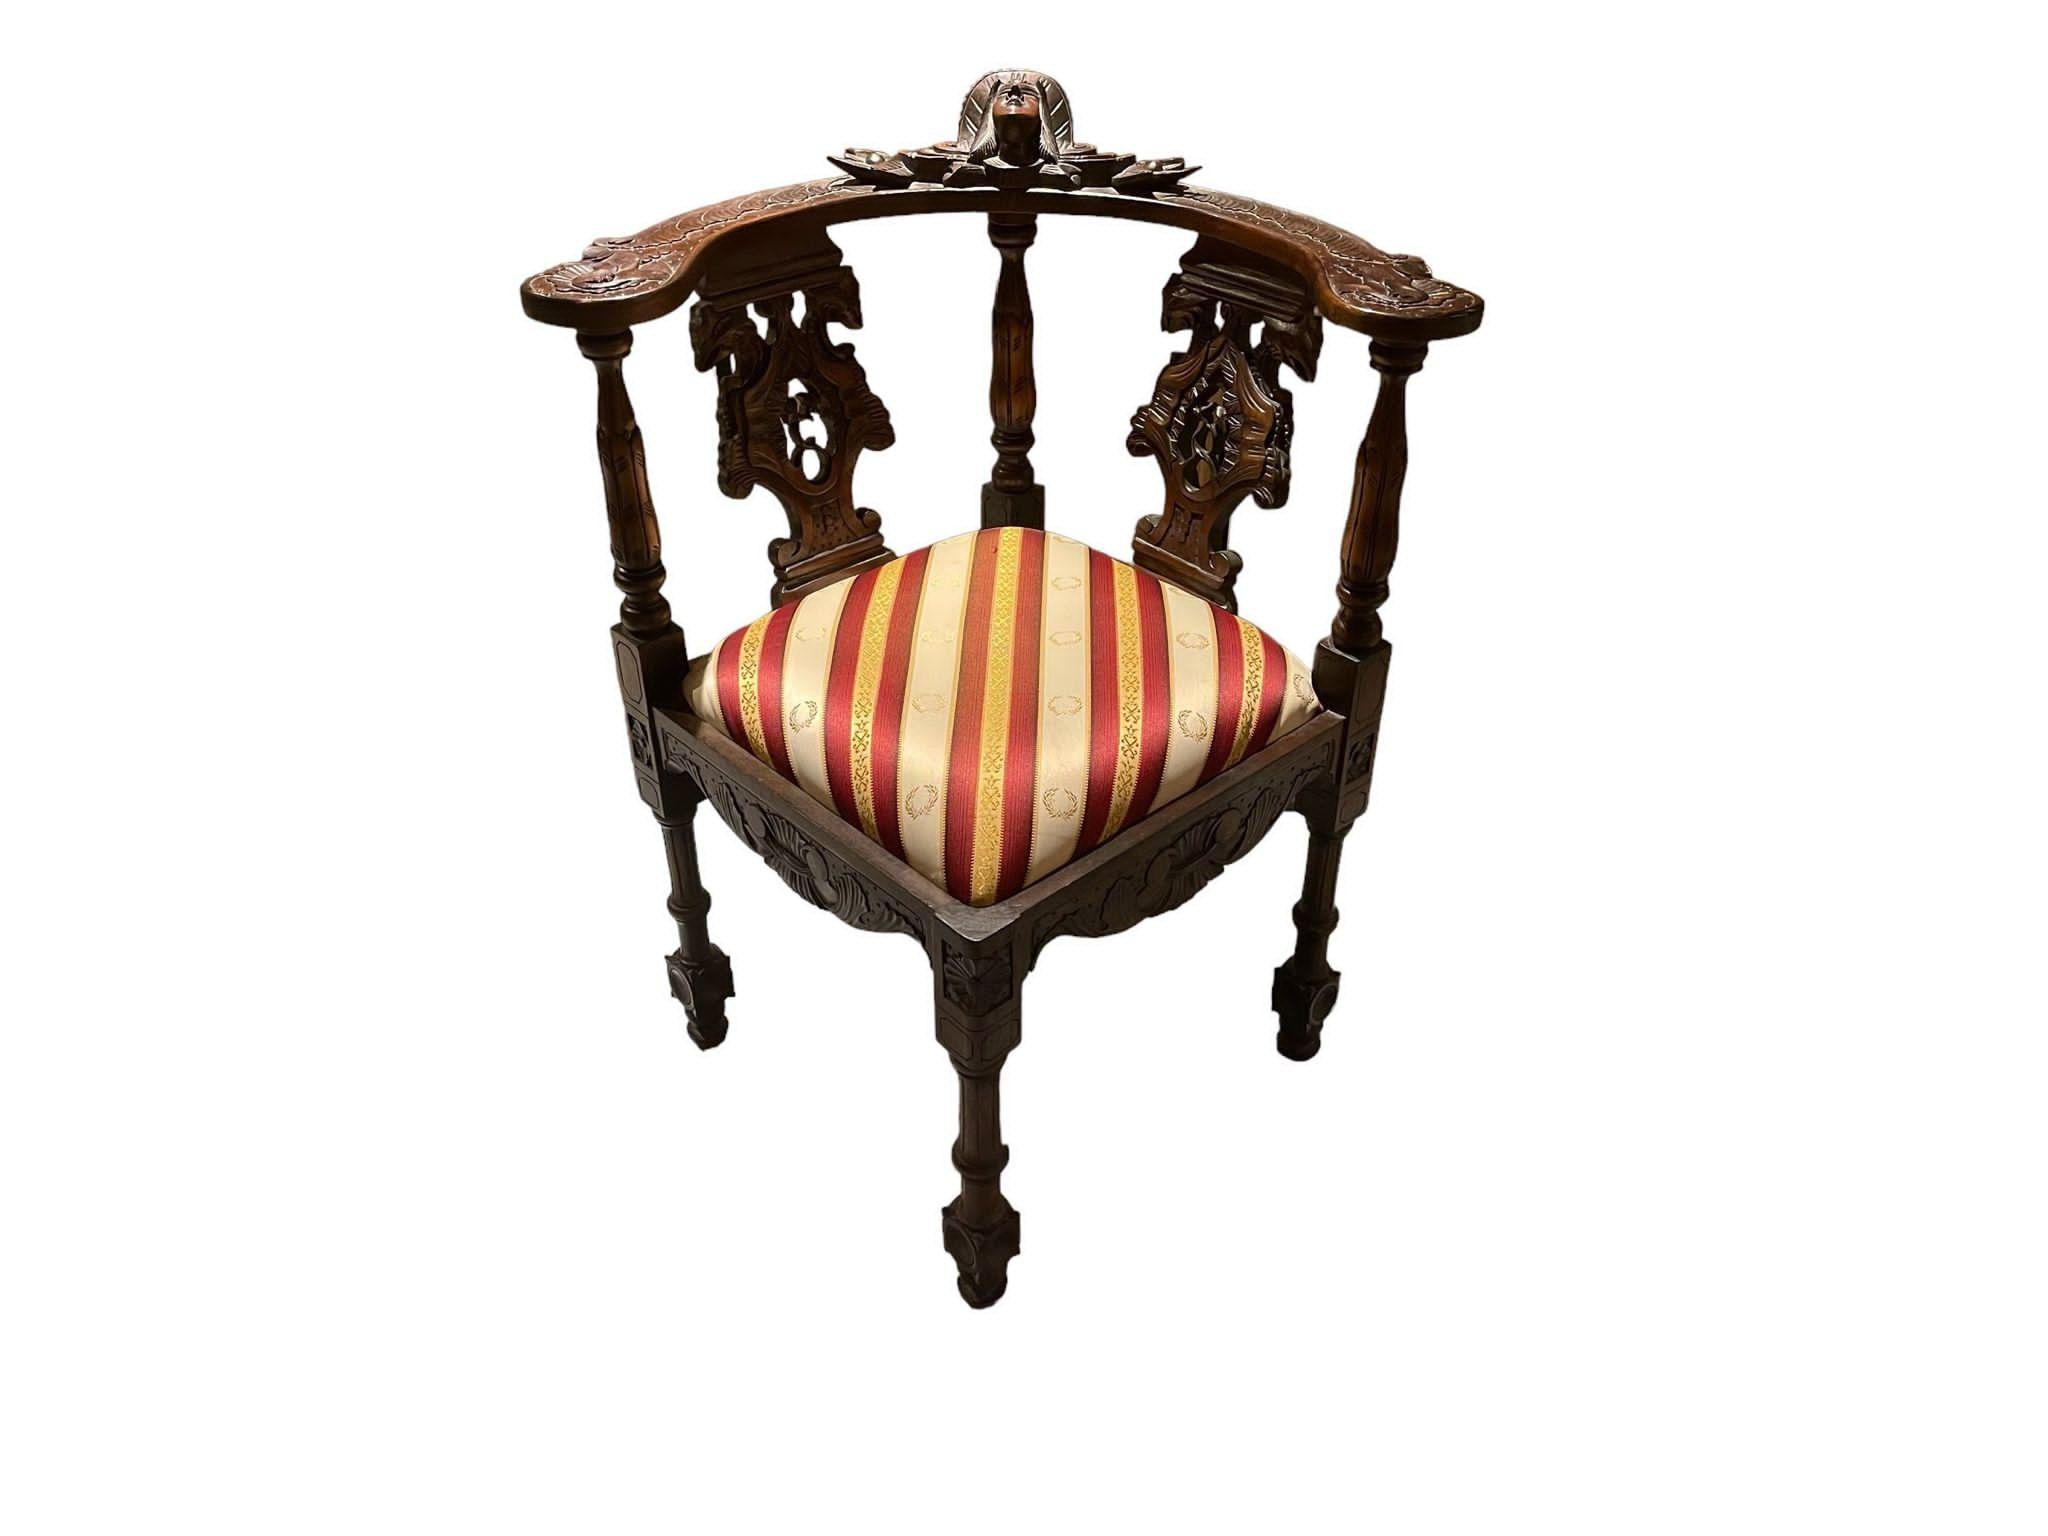 This pair of mahogany carved Victorian-style corner chairs is a true testament to the elegance and grandeur of the Victorian era. Crafted with meticulous attention to detail, these chairs exude opulence and sophistication. Made from rich mahogany